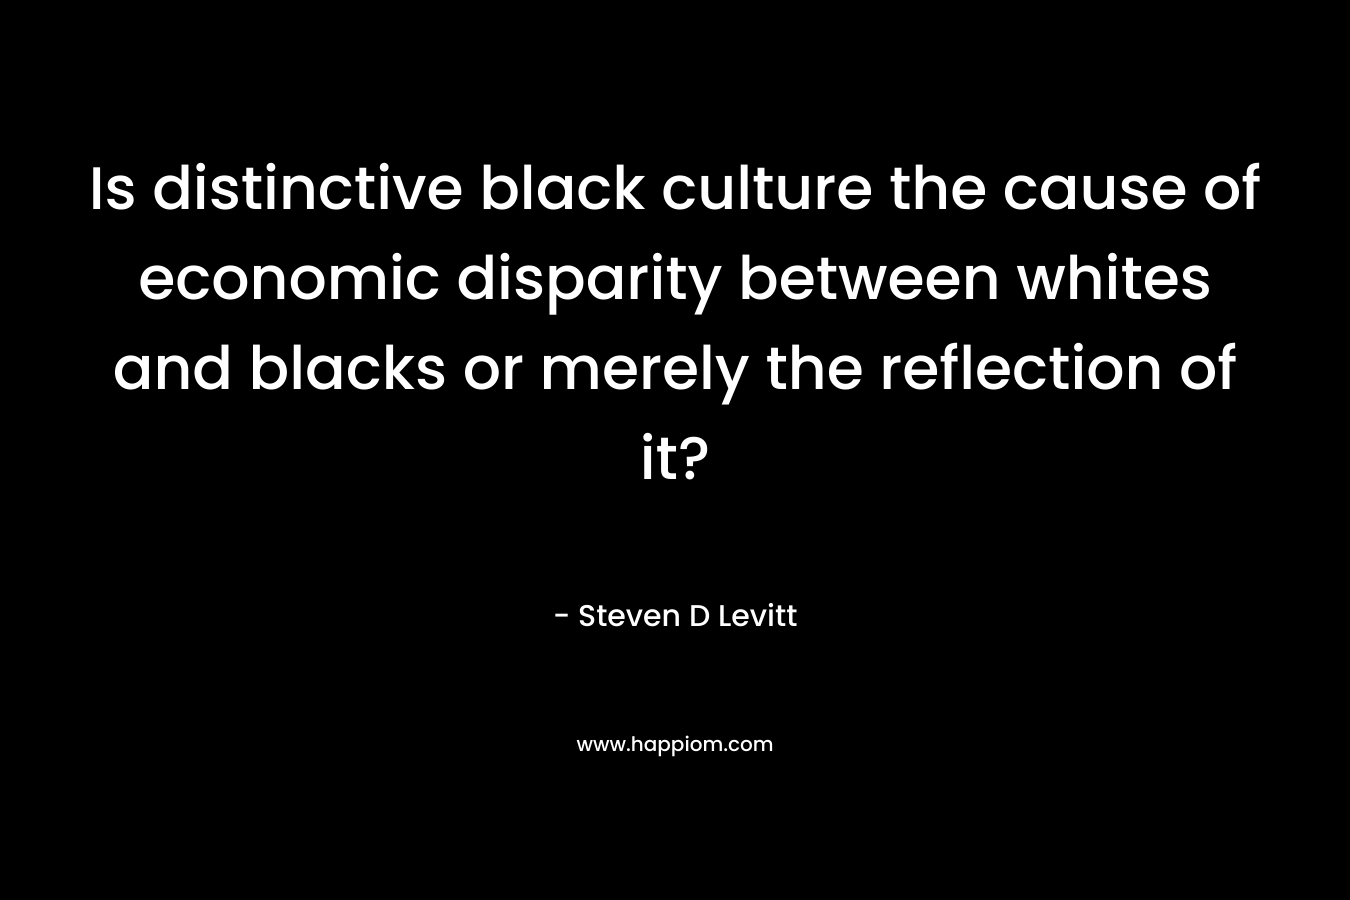 Is distinctive black culture the cause of economic disparity between whites and blacks or merely the reflection of it? – Steven D Levitt